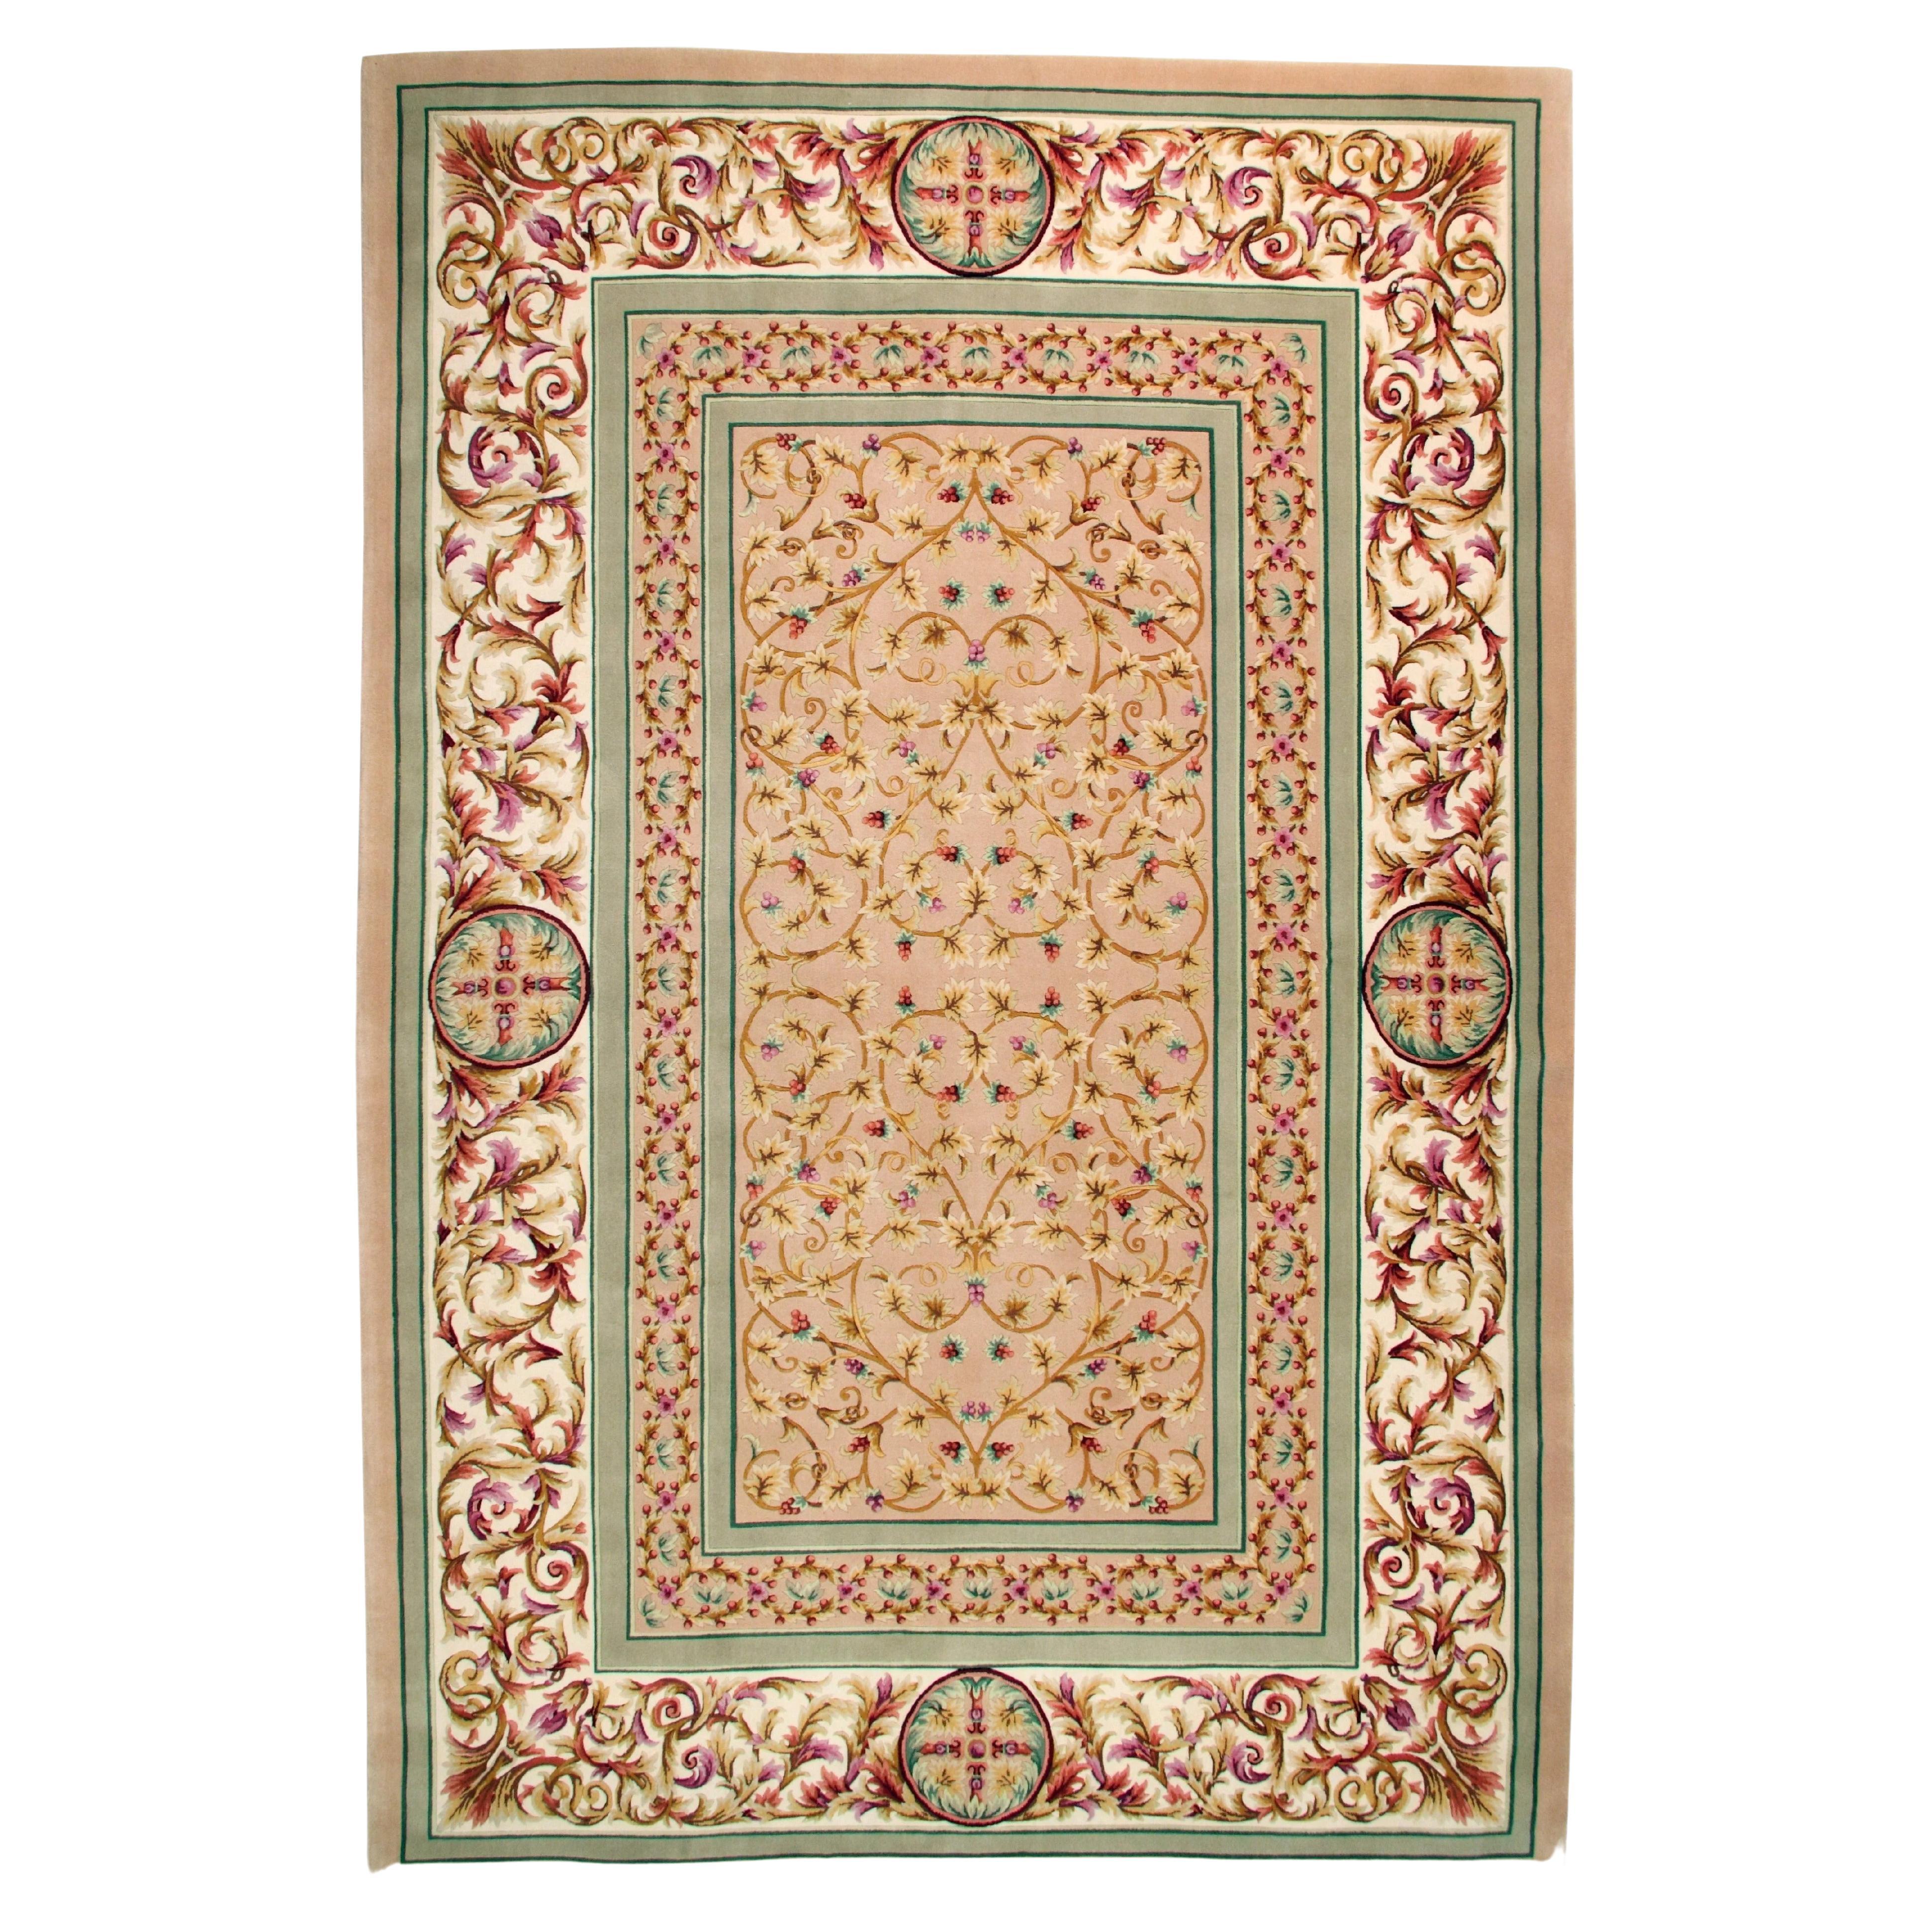 VIA COMO  'Chateau' Rug 6'7" x 9' 10" ft Hand Knotted Wool Silk Carpet Vintage